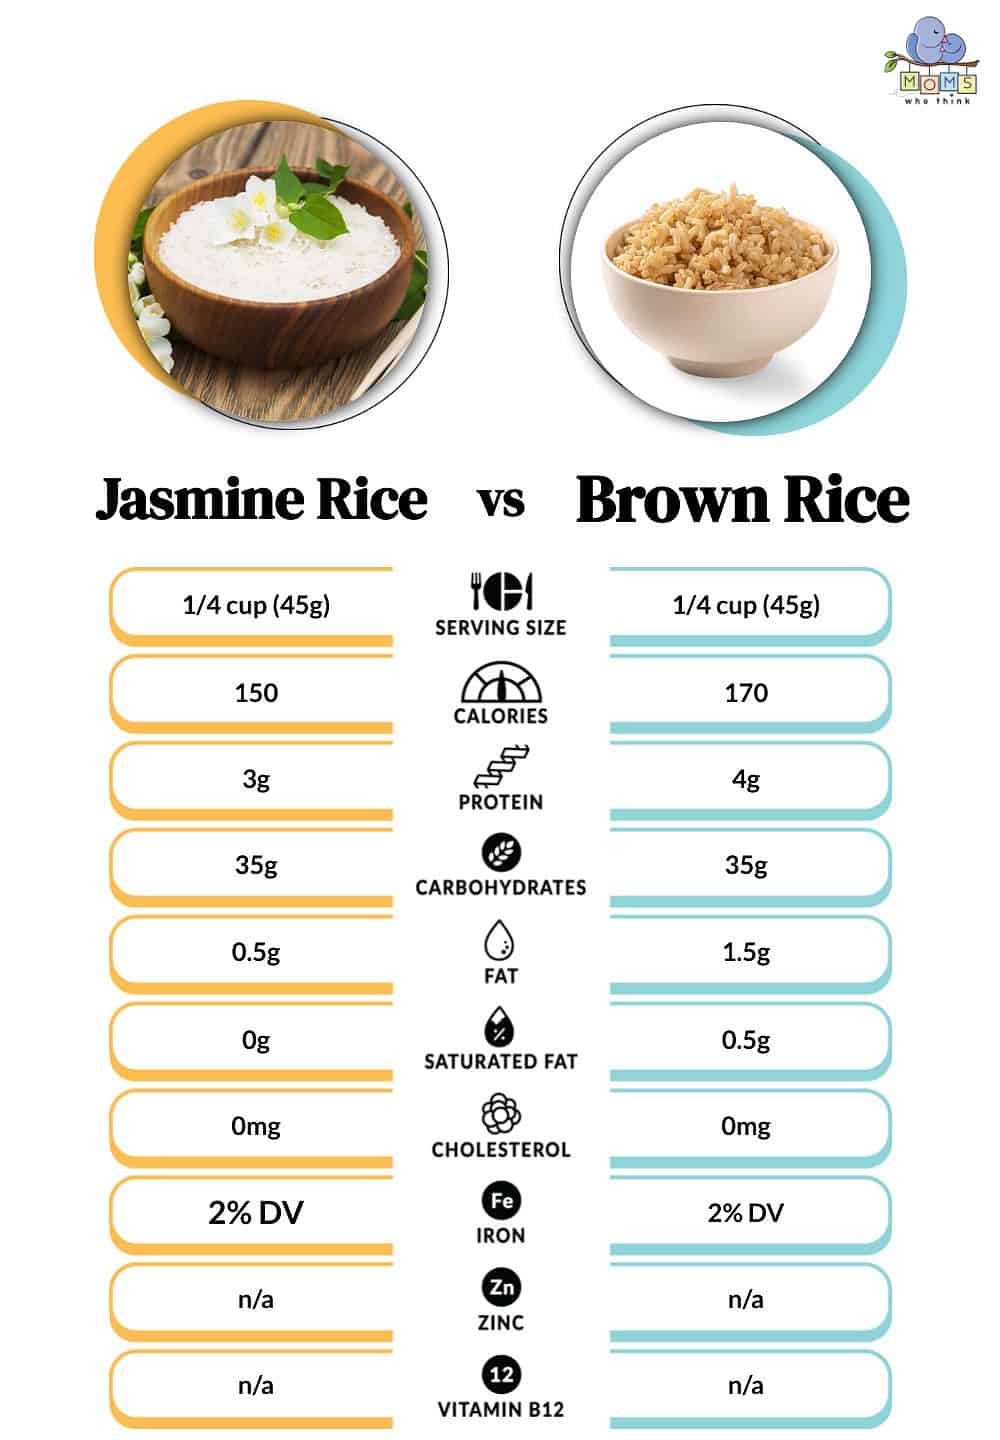 Jasmine Rice vs Brown Rice Nutritional Facts